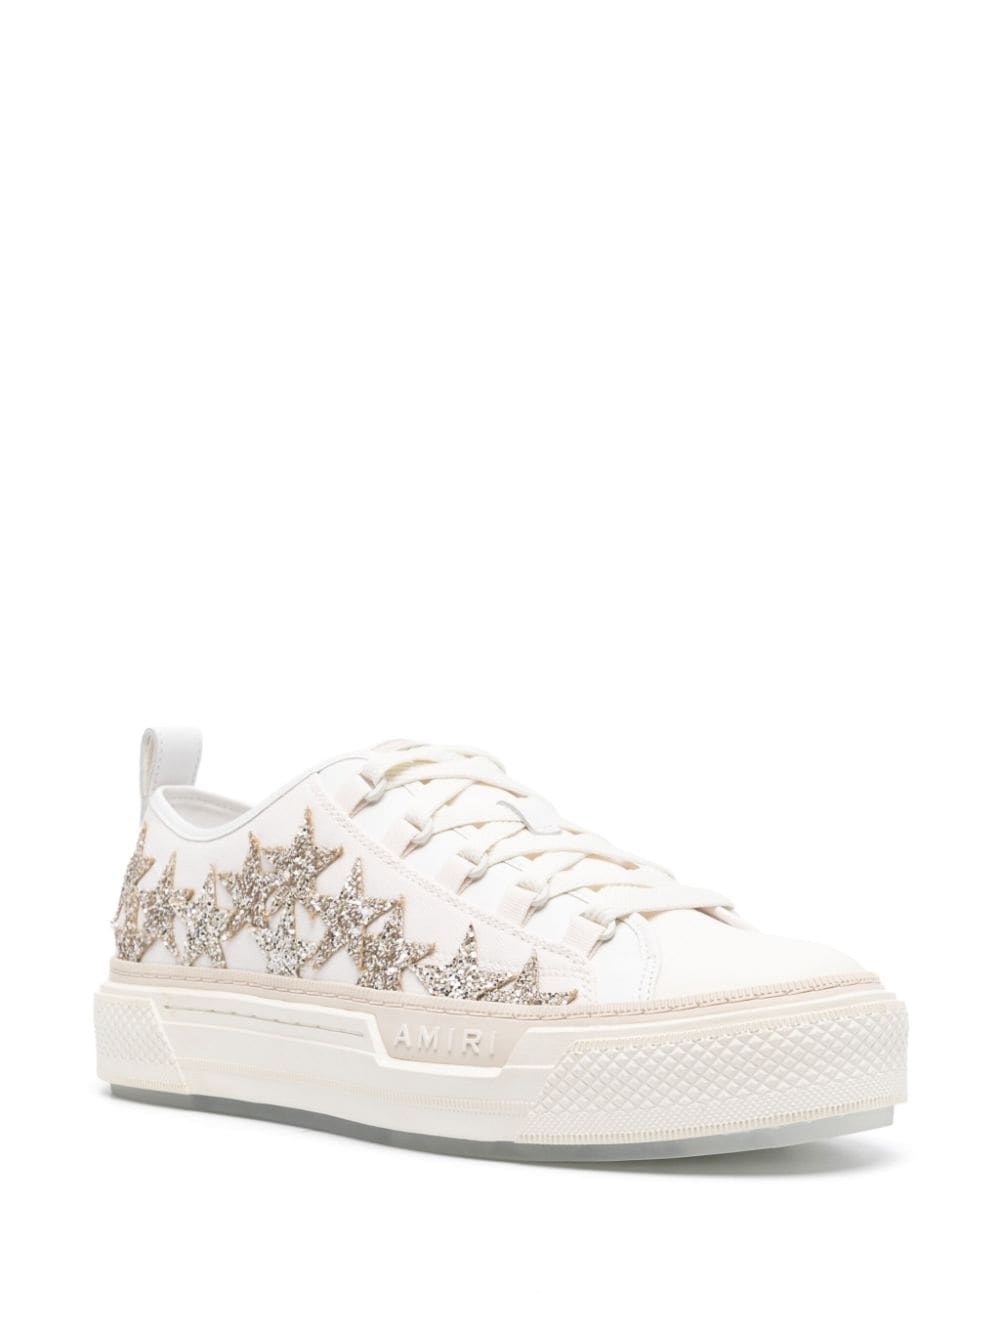 Stars Court low-top sneakers